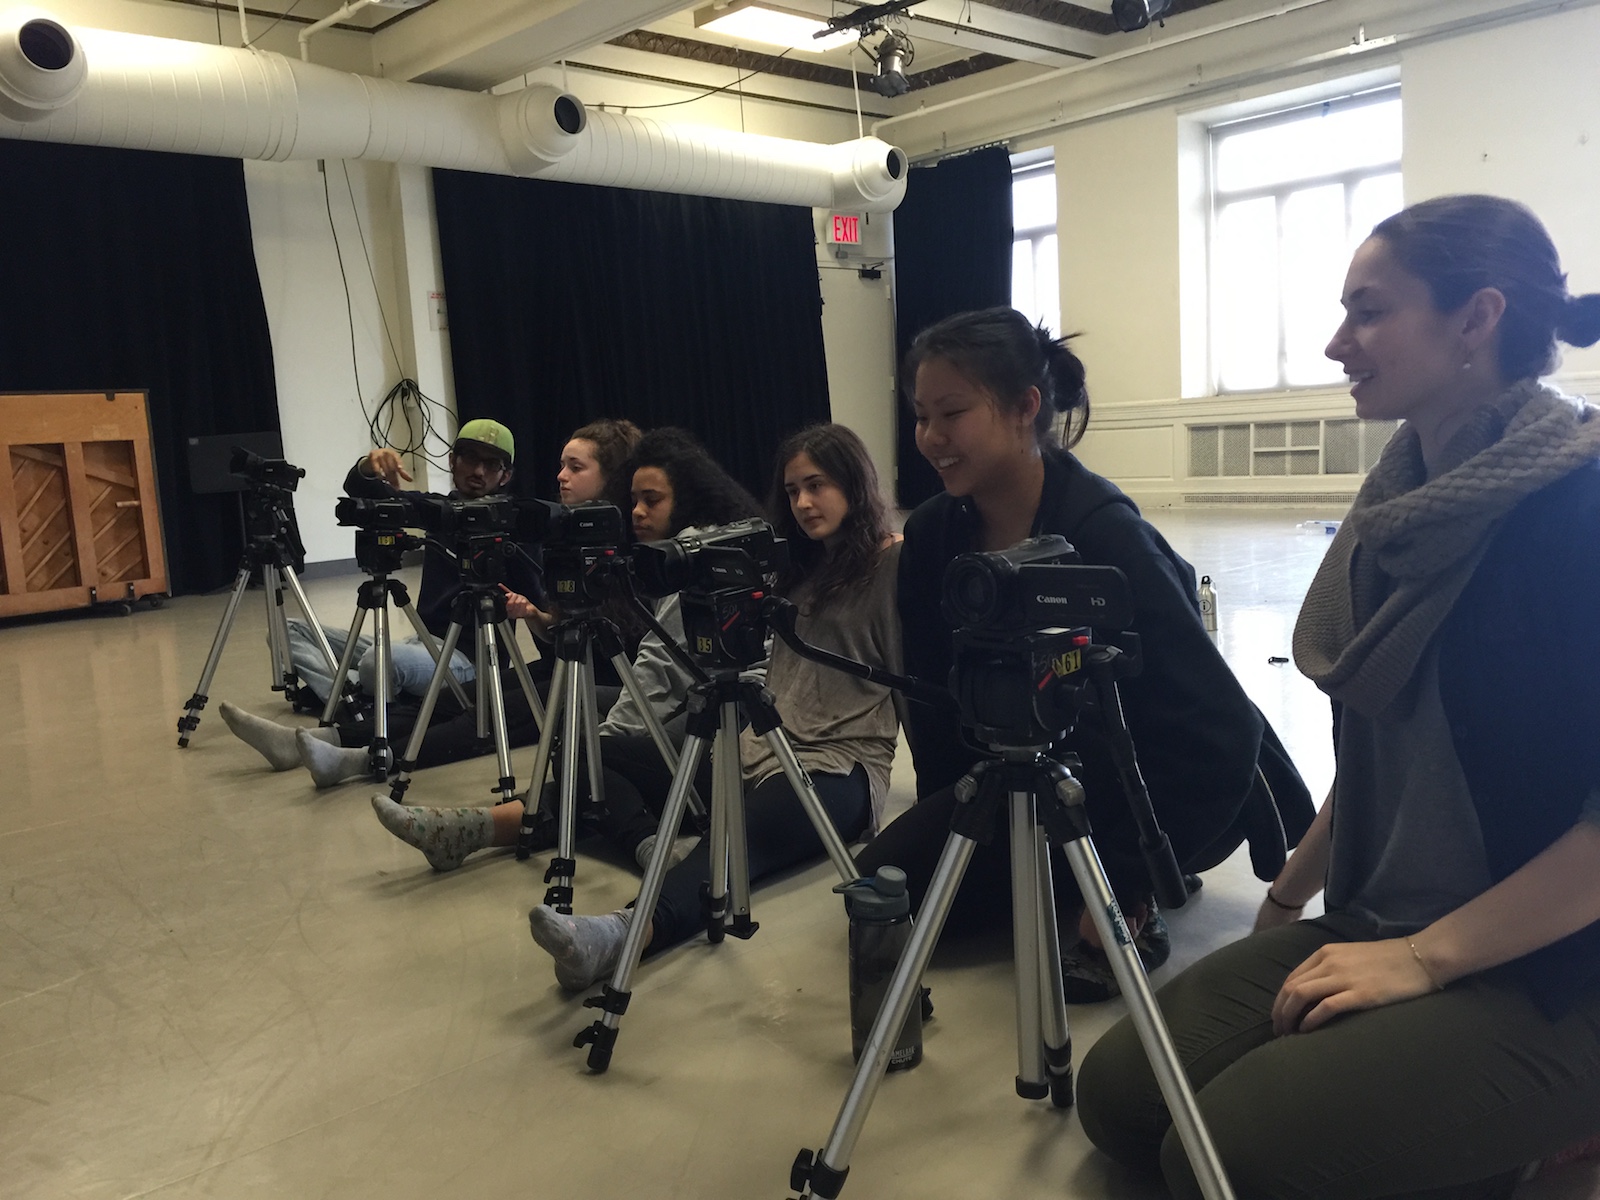 Dance and Technology students learn surrounding technologies for a "Filming the Moving Bodies" course taught by Associate Arts Professor Cari Ann Shim Sham.